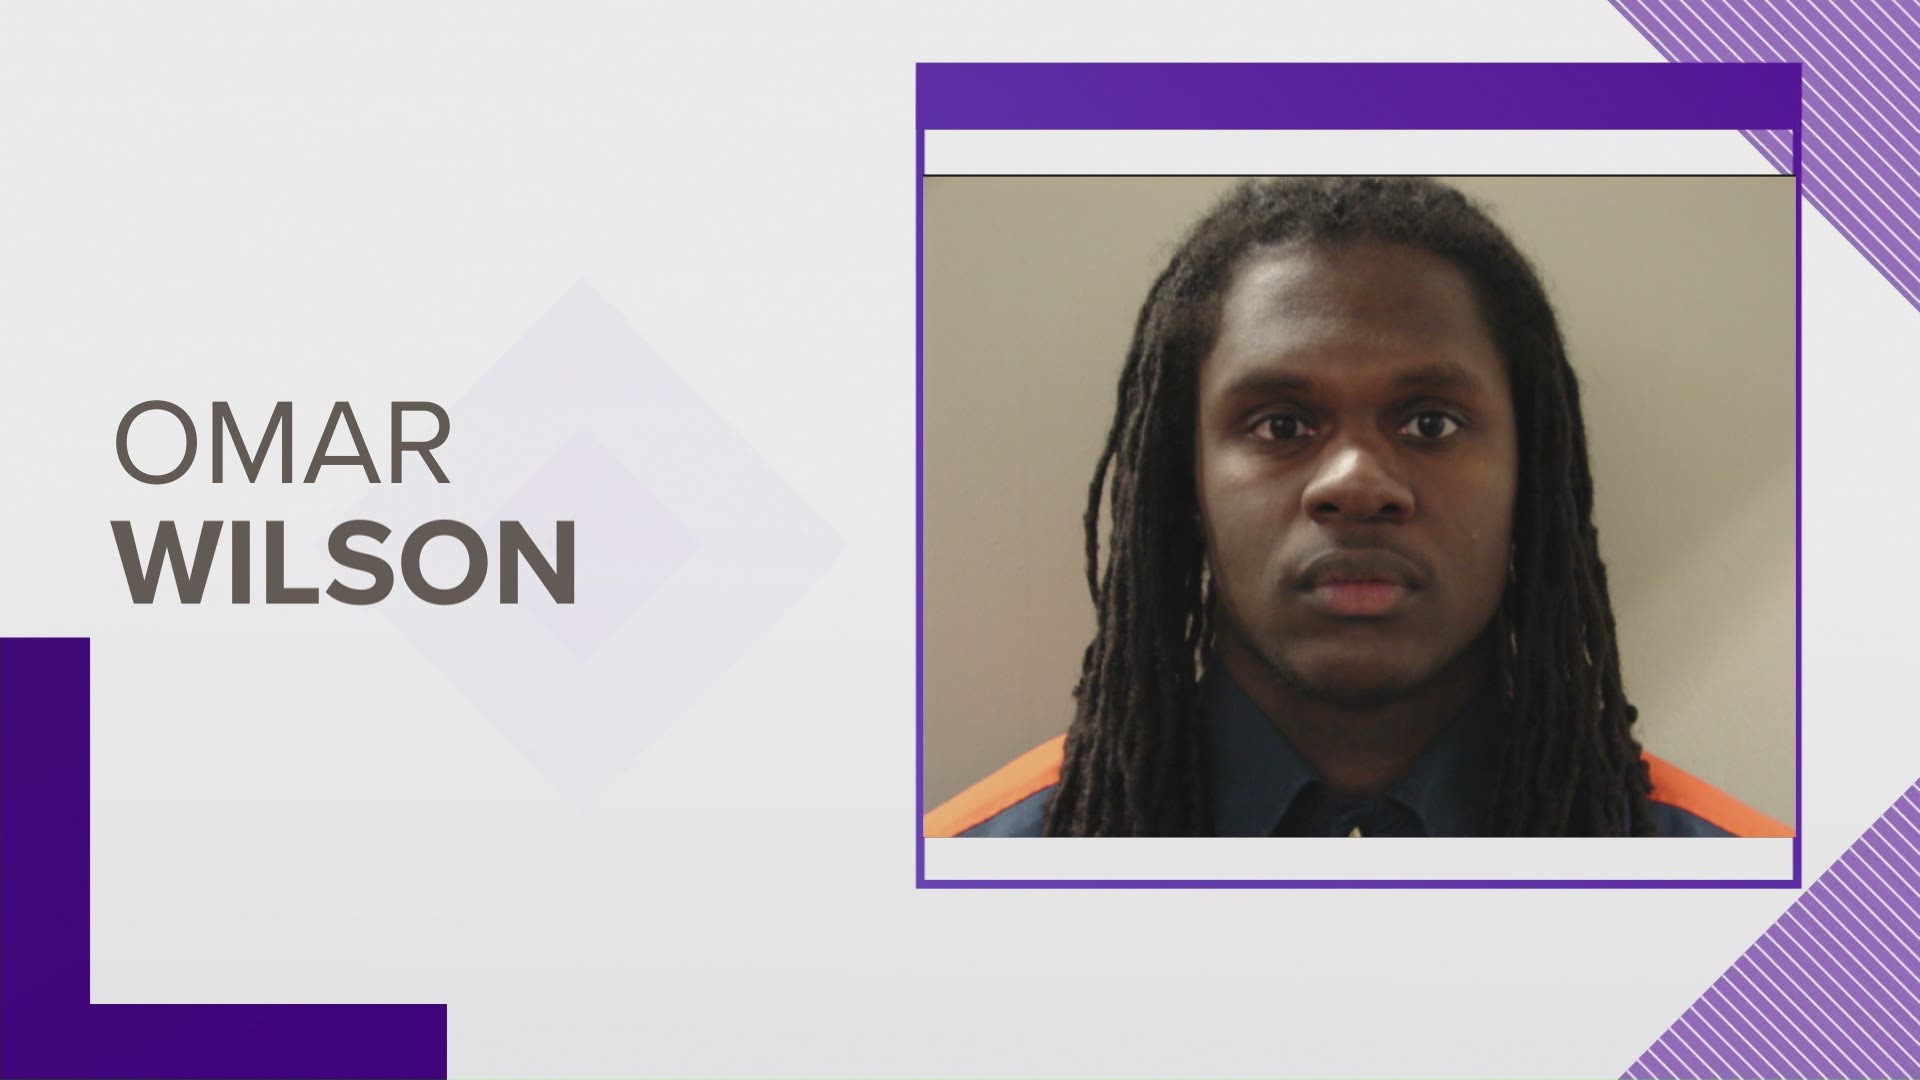 Grand Rapids Police have made an arrest in a murder case from nearly 5 years ago. Omar Wilson is facing murder and weapons charges.